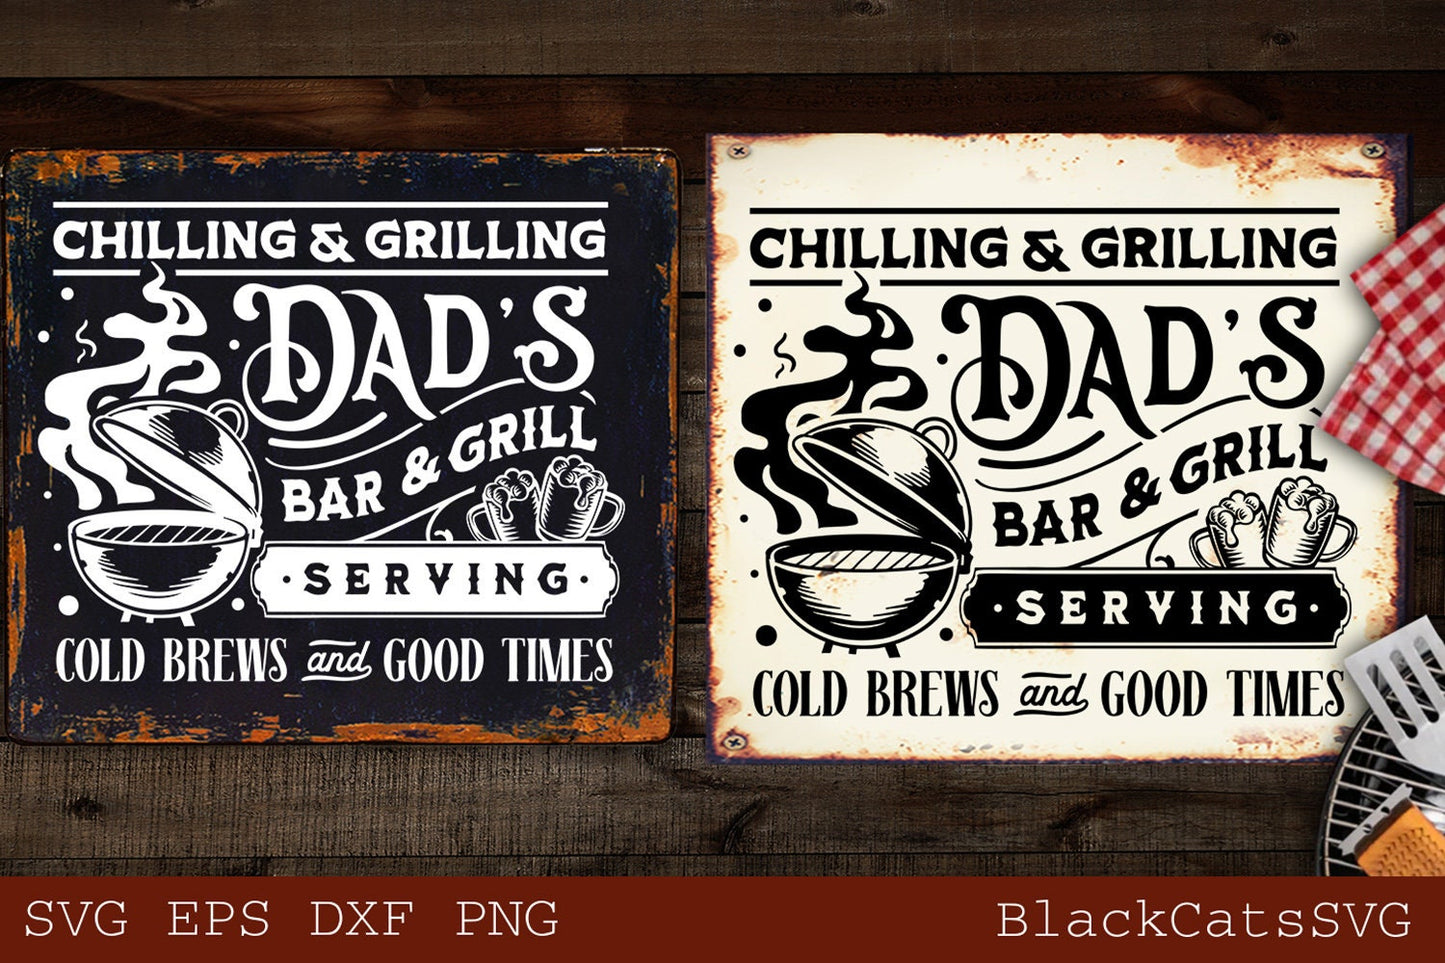 Dad's BBQ svg, Chilling & Grilling, Barbecue svg, Grilling svg, Dad's Bar and Grill svg, Father's day gift svg, BBQ Cut File, Funny Apron